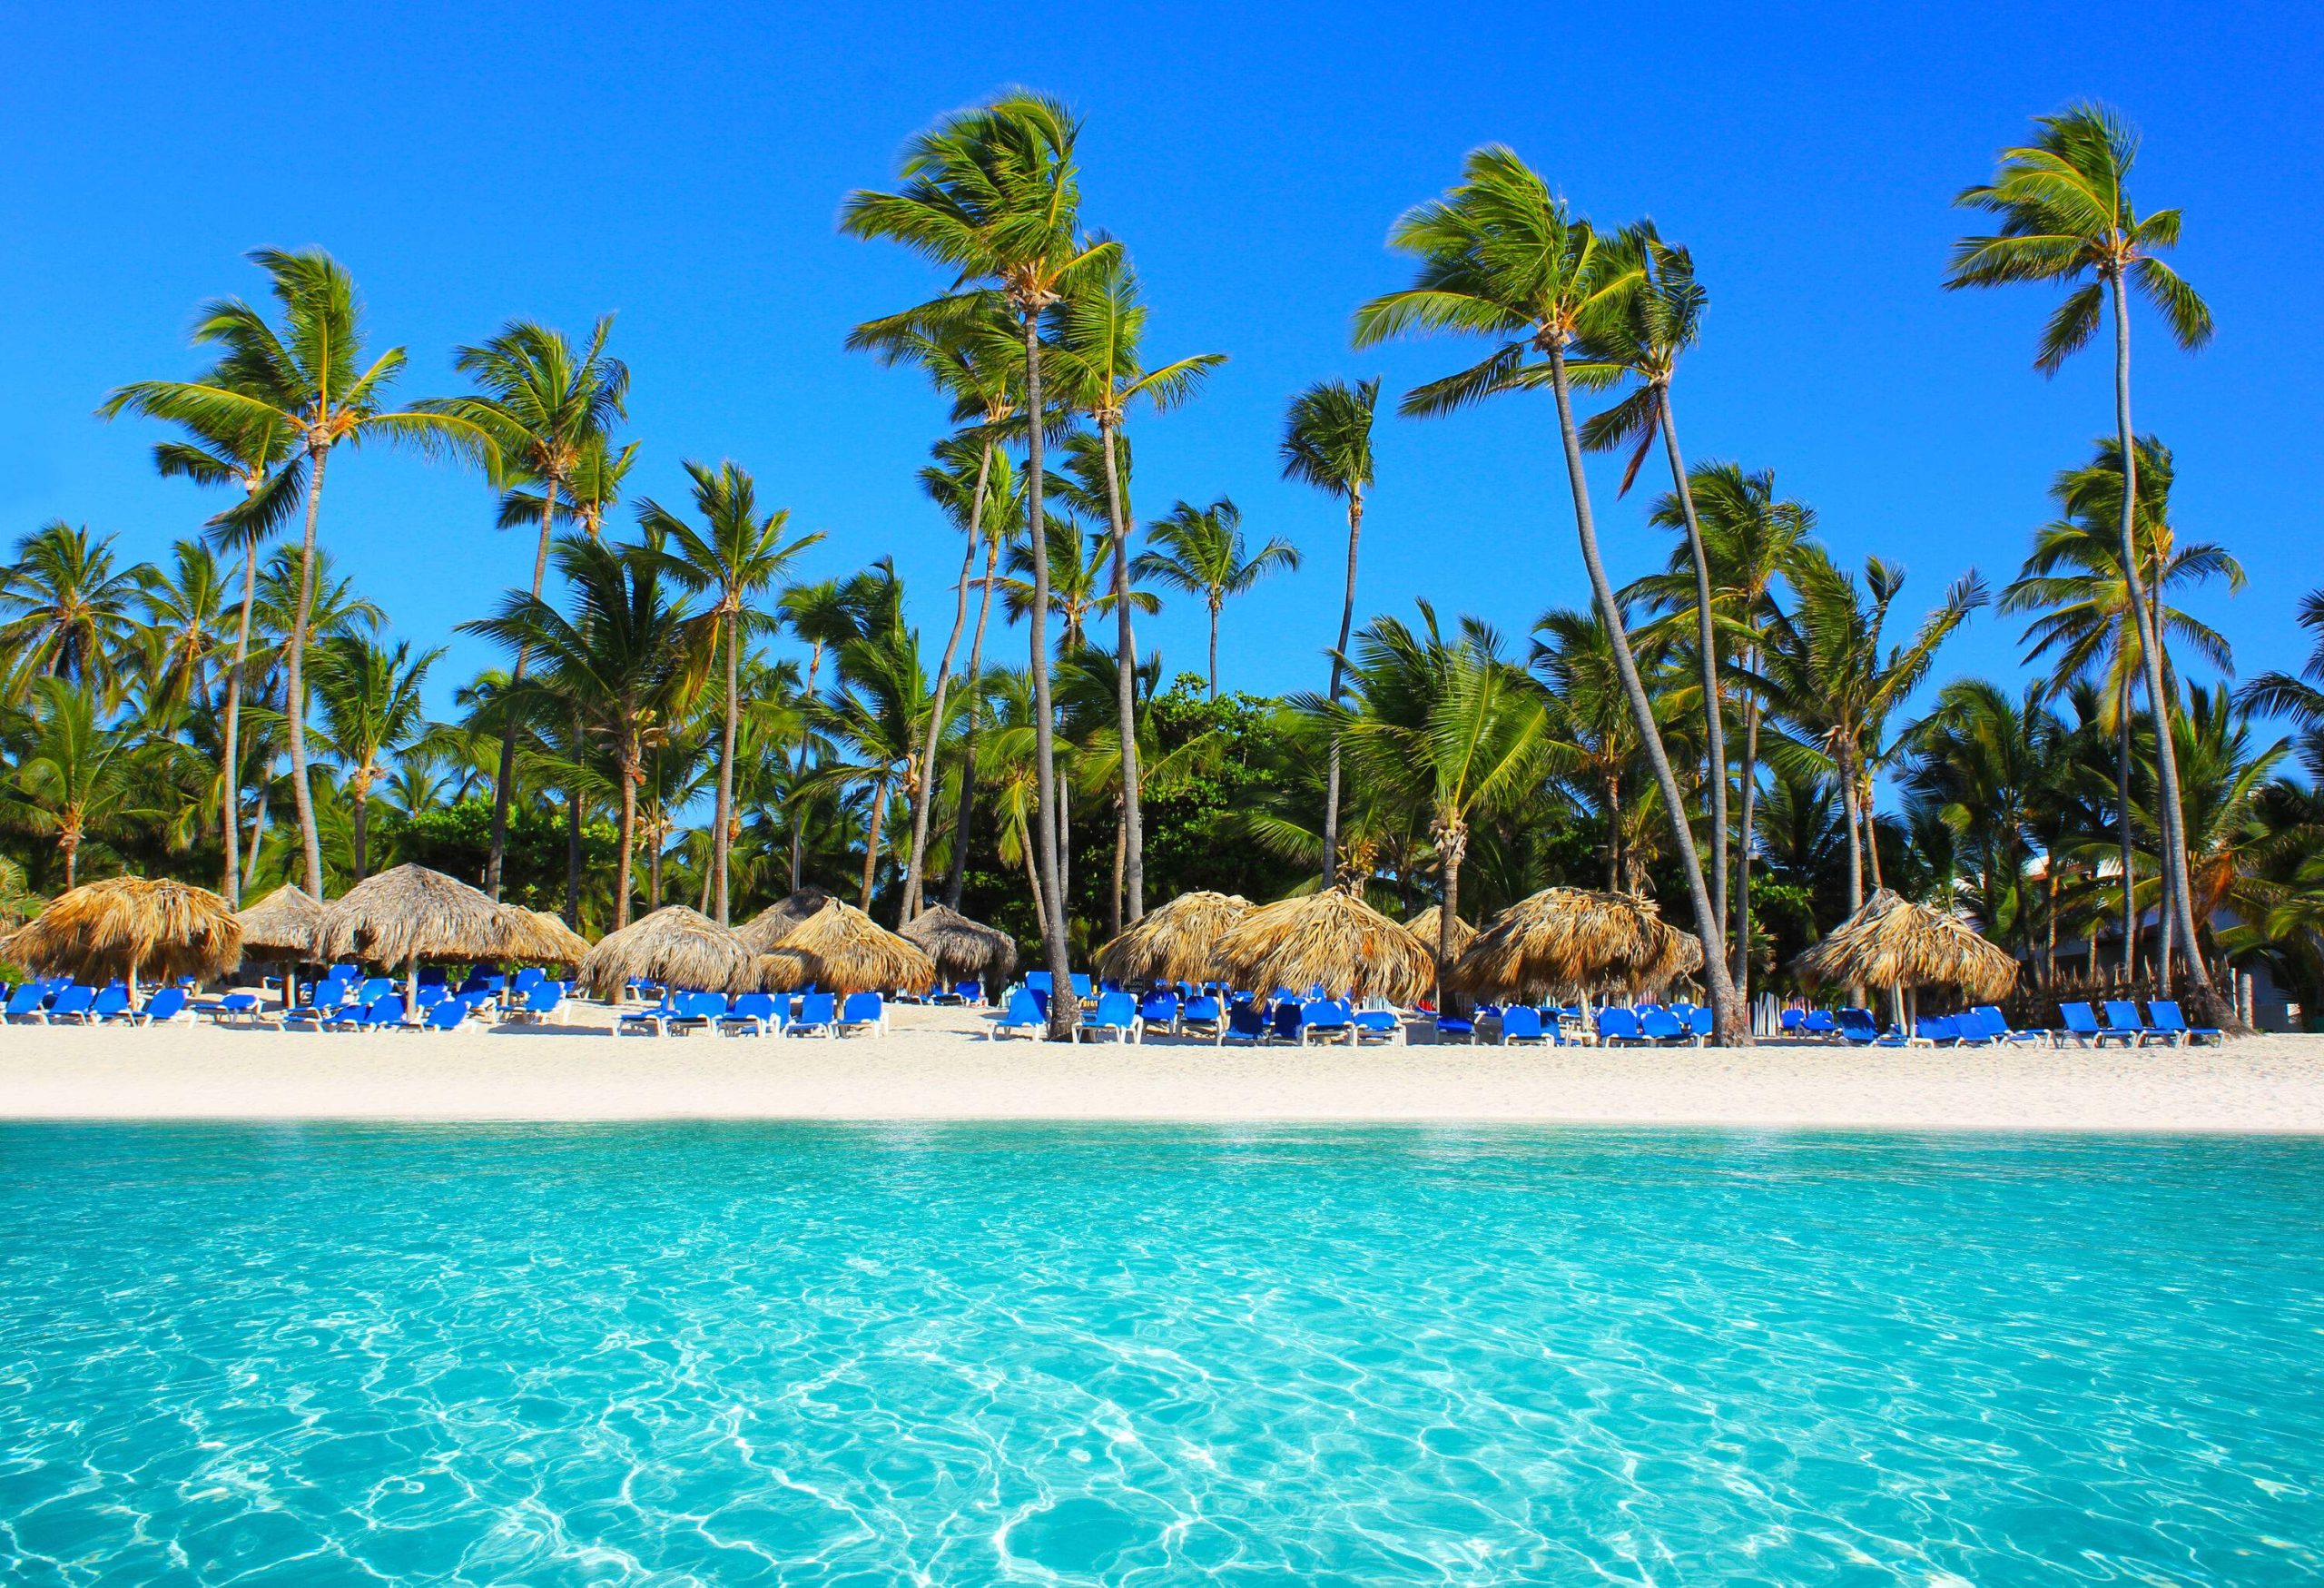 Blue sunbeds and thatched umbrellas set under the swaying tall palm trees on a sandy turquoise beach.